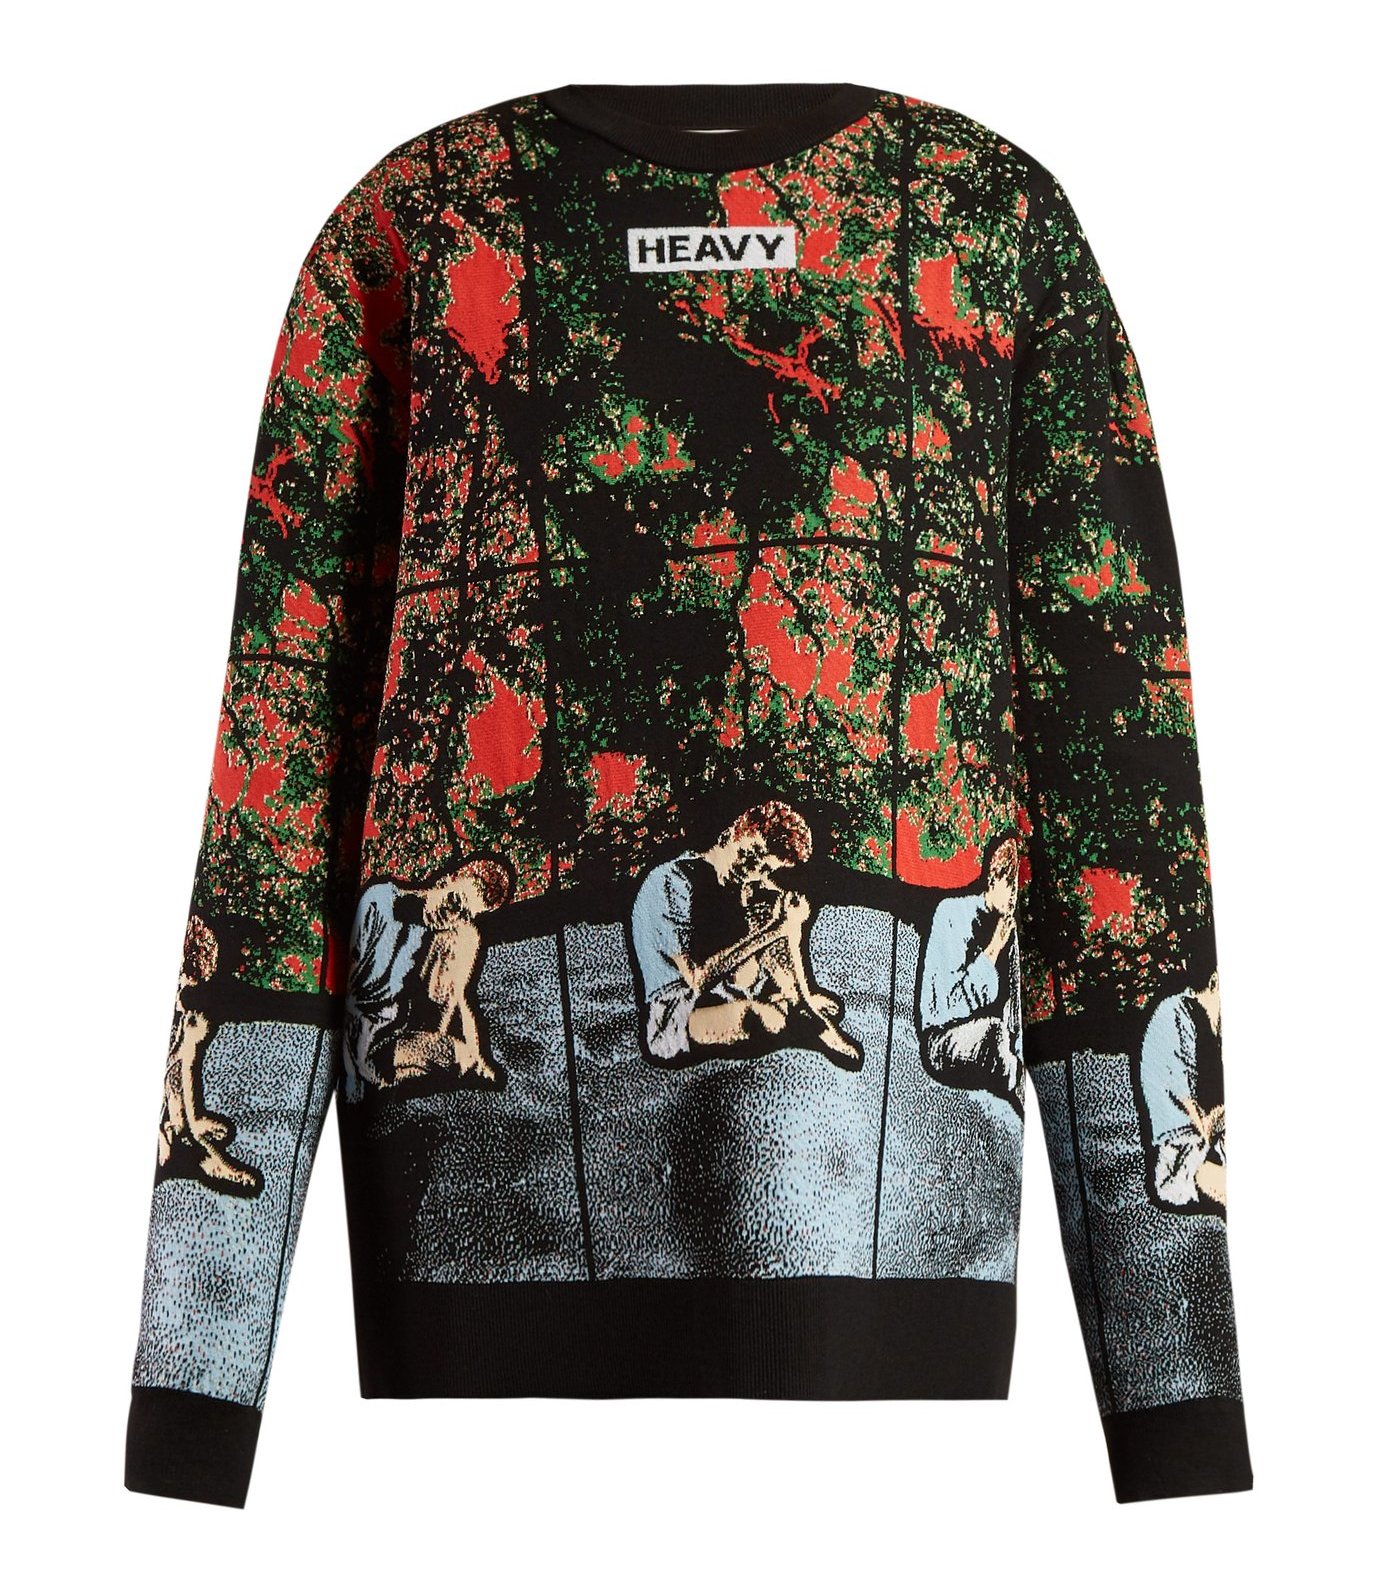 JW Anderson x Gilbert and George Sweater